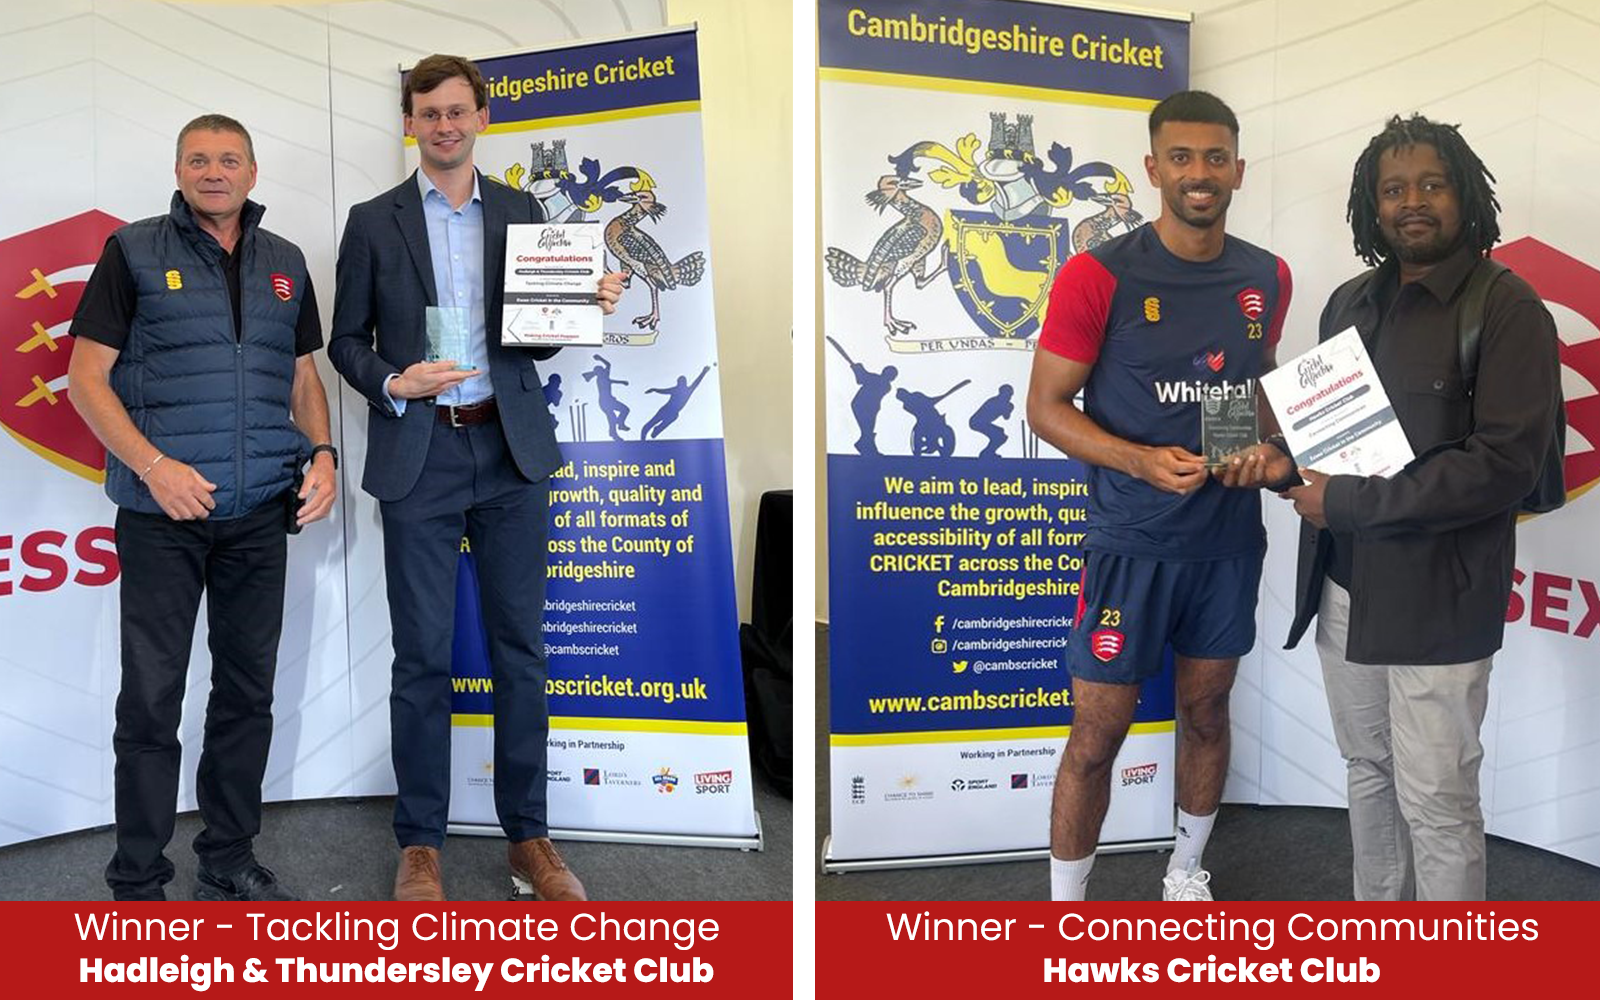 Tackling Climate Change and Connecting Communities Winners